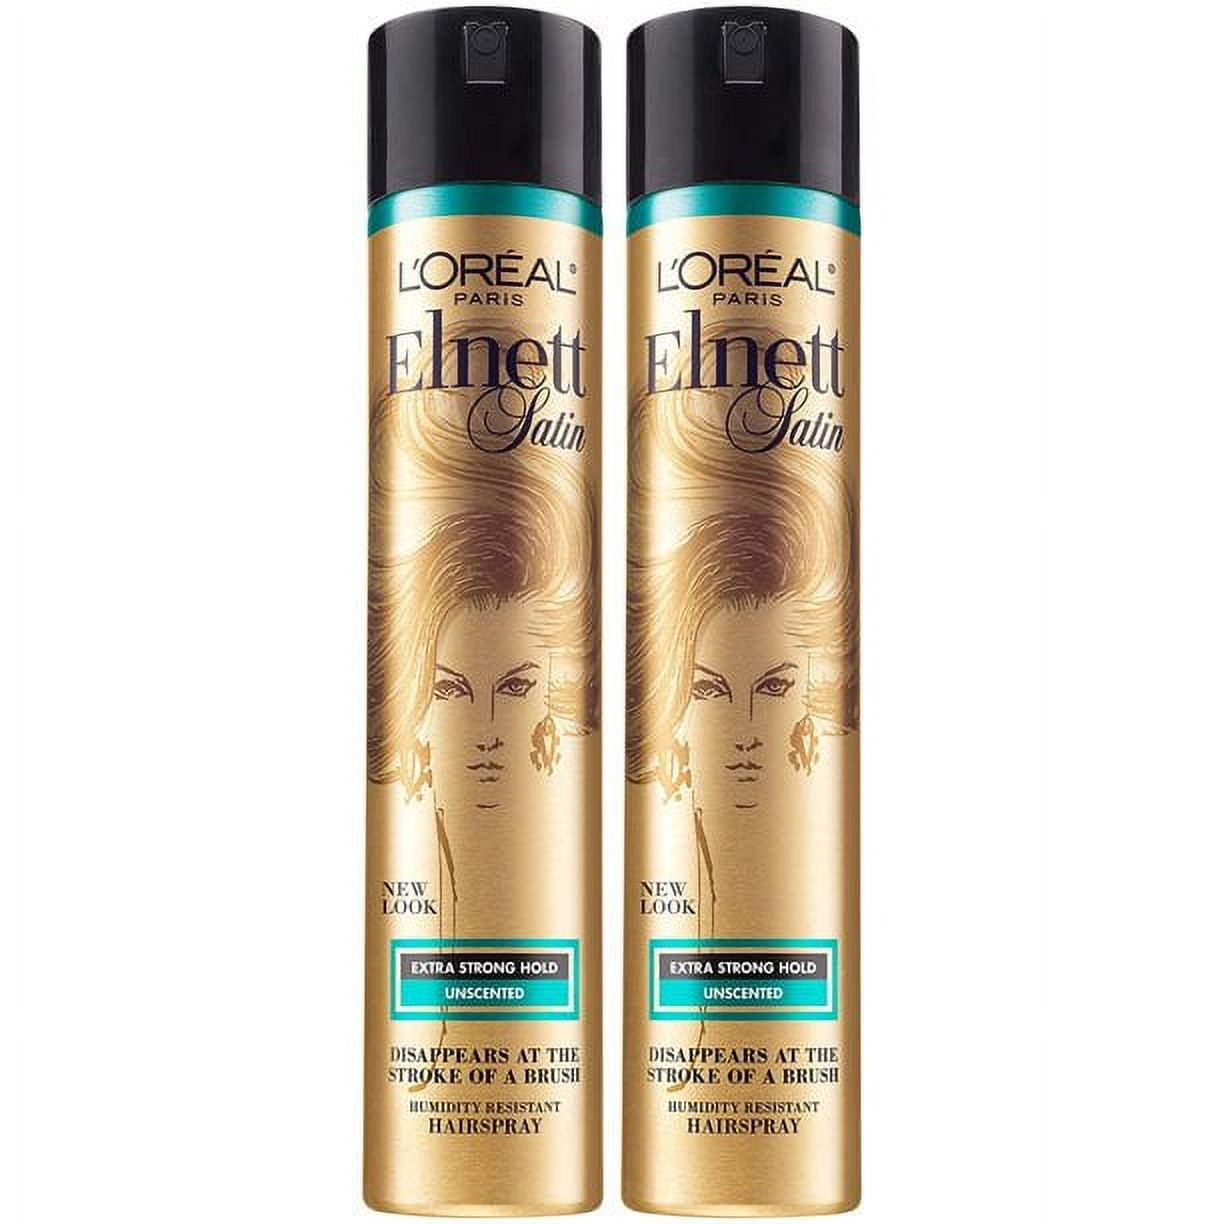 L'Oreal Paris Hair Care Elnett Satin Extra Strong Hold Hairspray, Unscented, 11 Ounce (Pack of 2)